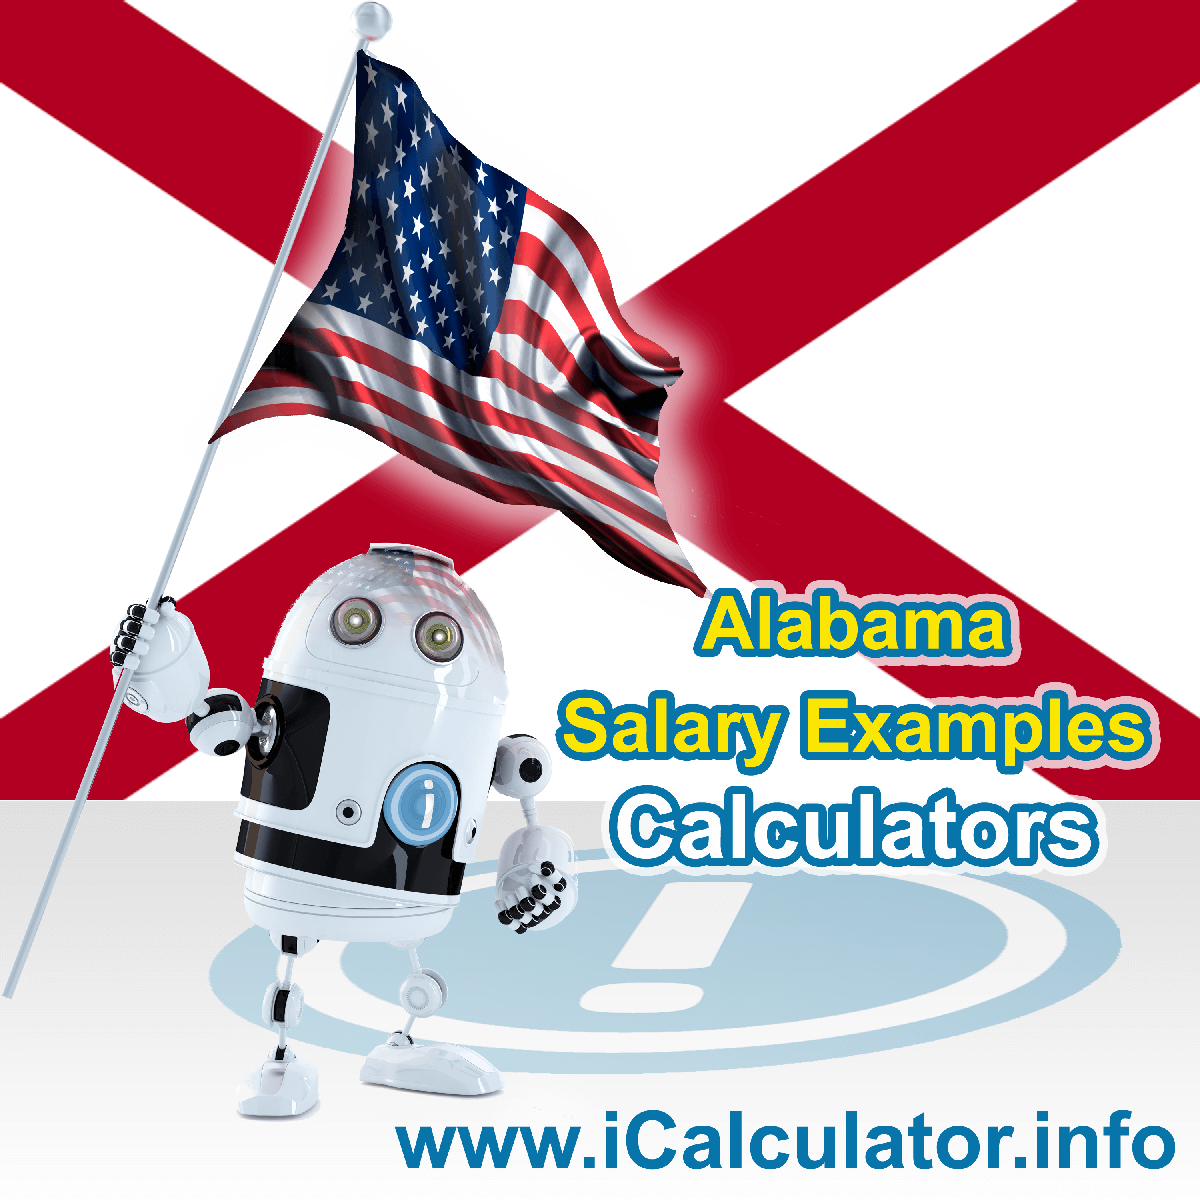 Alabama Salary Example for $ 250,000.00 in 2023 | iCalculator™ | $ 250,000.00 salary example for employee and employer paying Alabama State tincome taxes. Detailed salary after tax calculation including Alabama State Tax, Federal State Tax, Medicare Deductions, Social Security, Capital Gains and other income tax and salary deductions complete with supporting Alabama state tax tables 